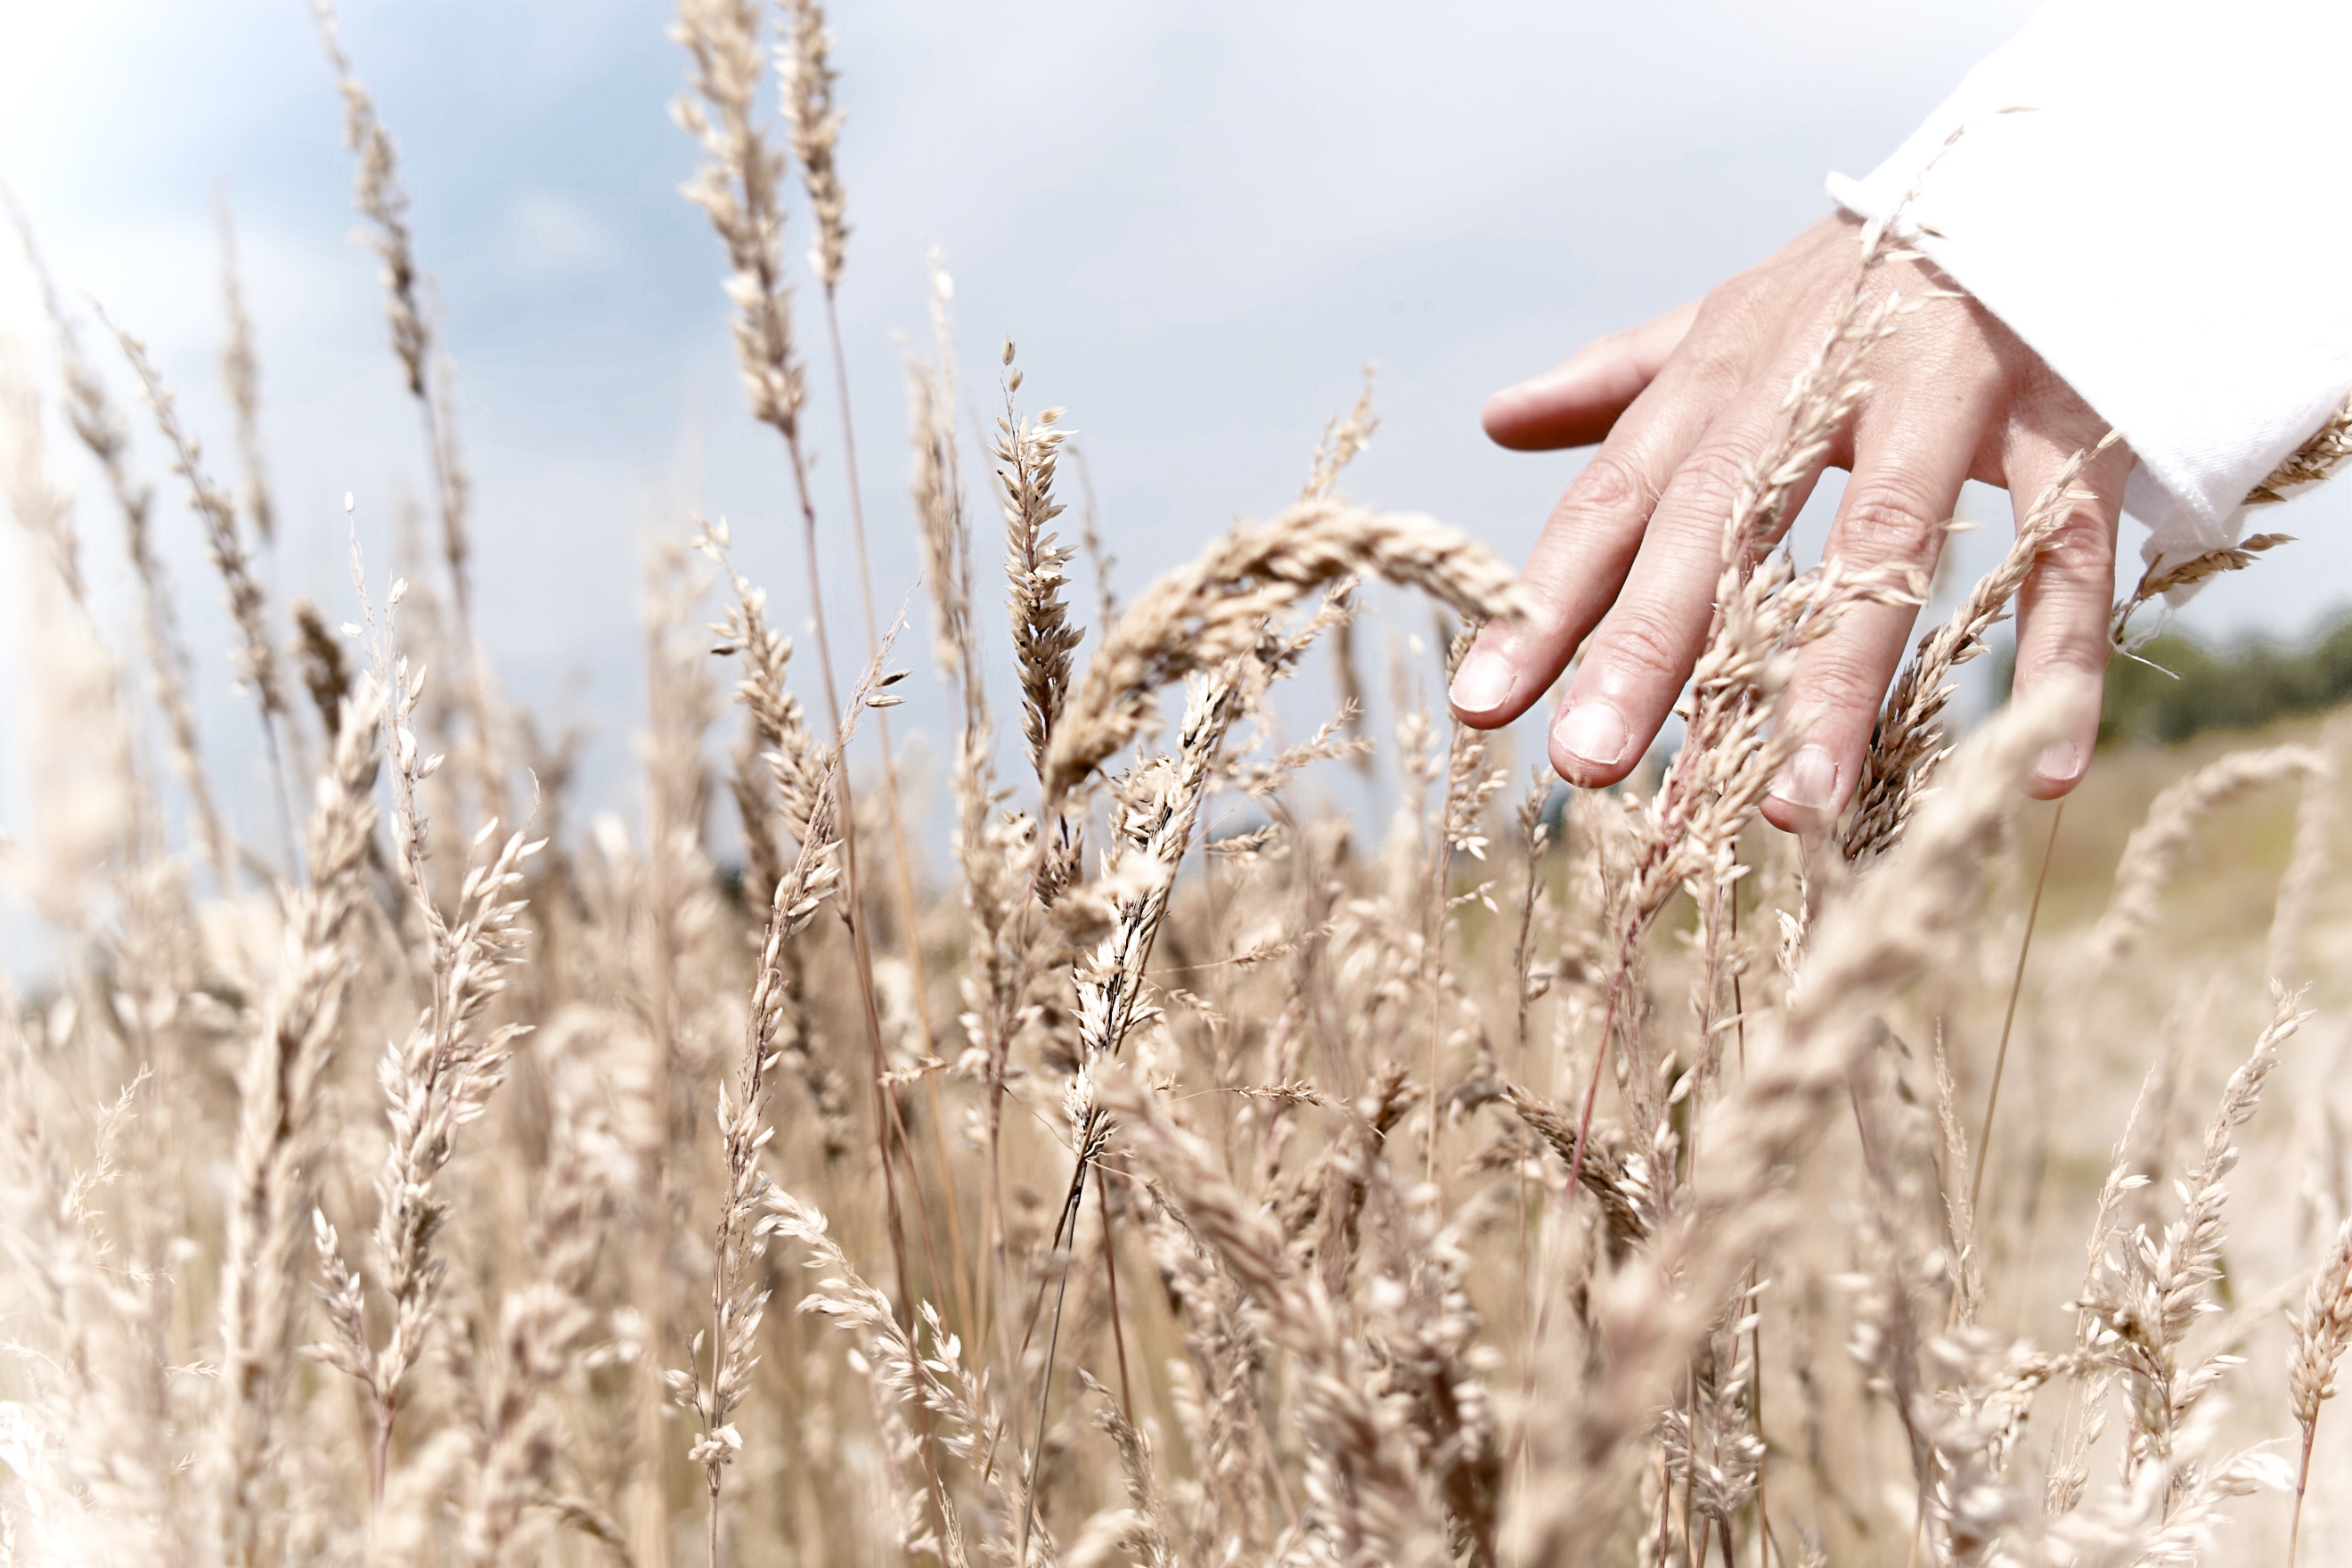 android touch, grass, hand, miscellanea, miscellaneous, field, touching